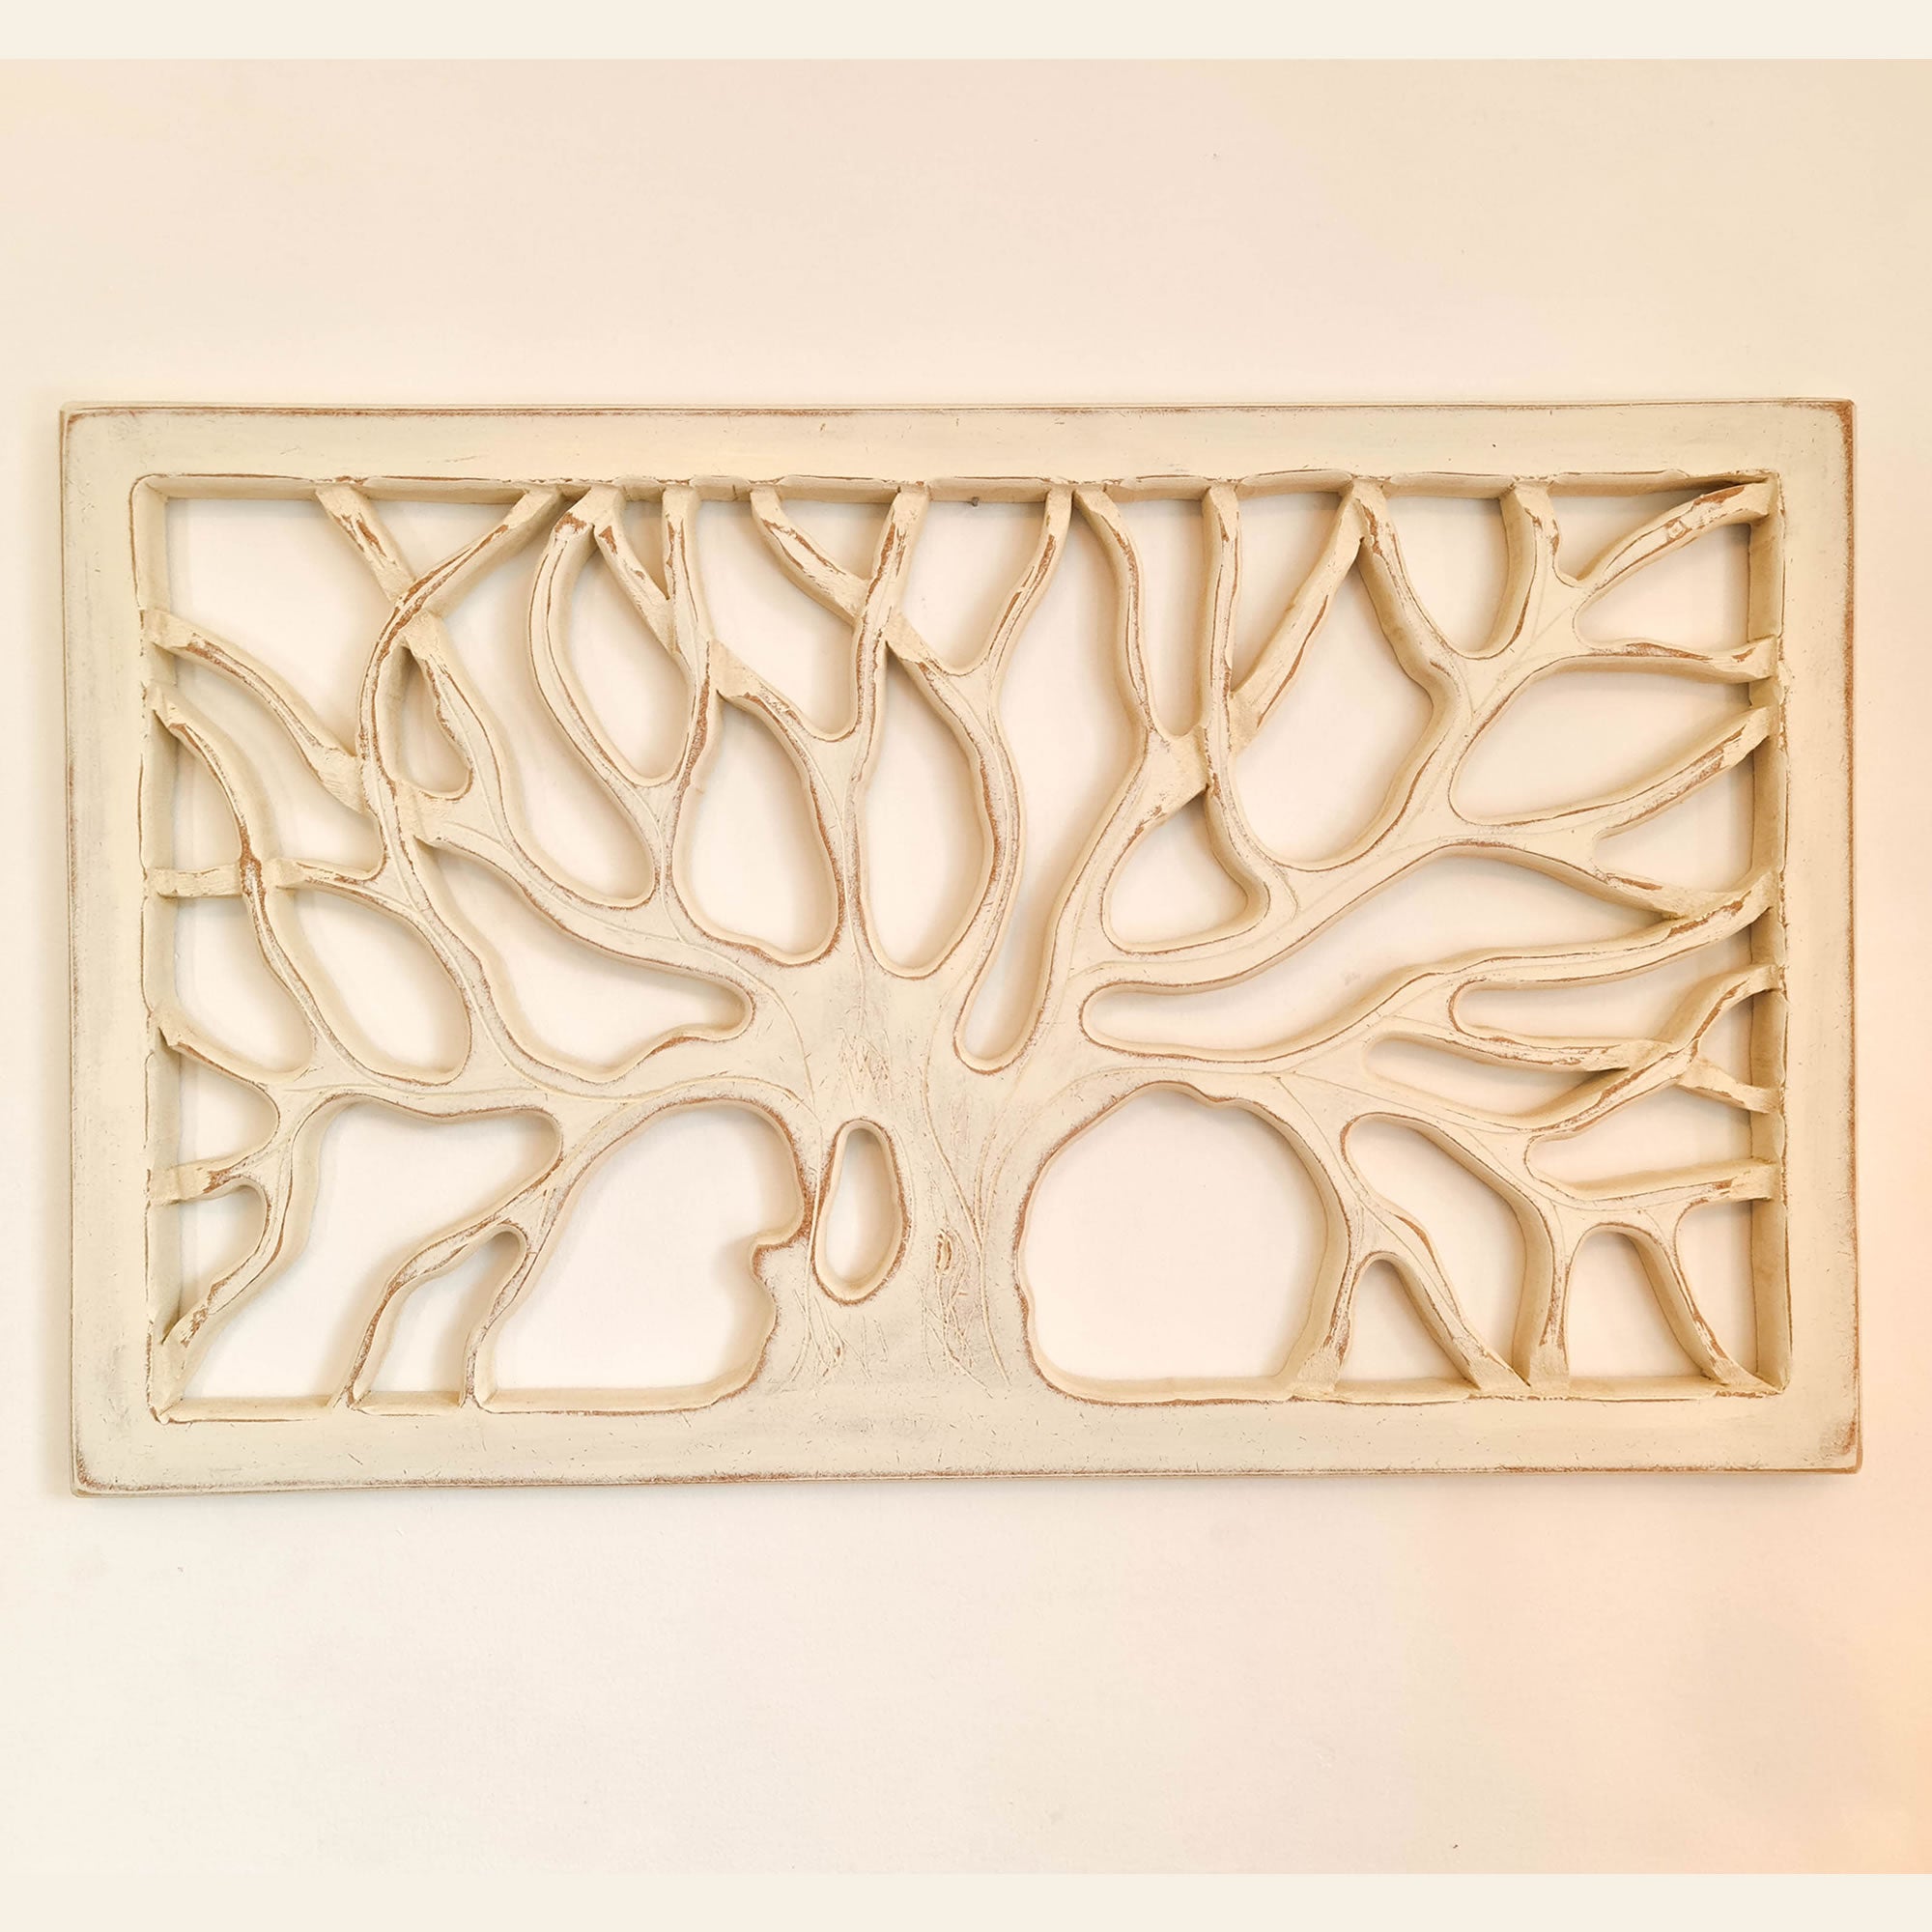 Hand Carved Shabby Chic Wooden Tree of Life Wall Art - Decorative Distressed White